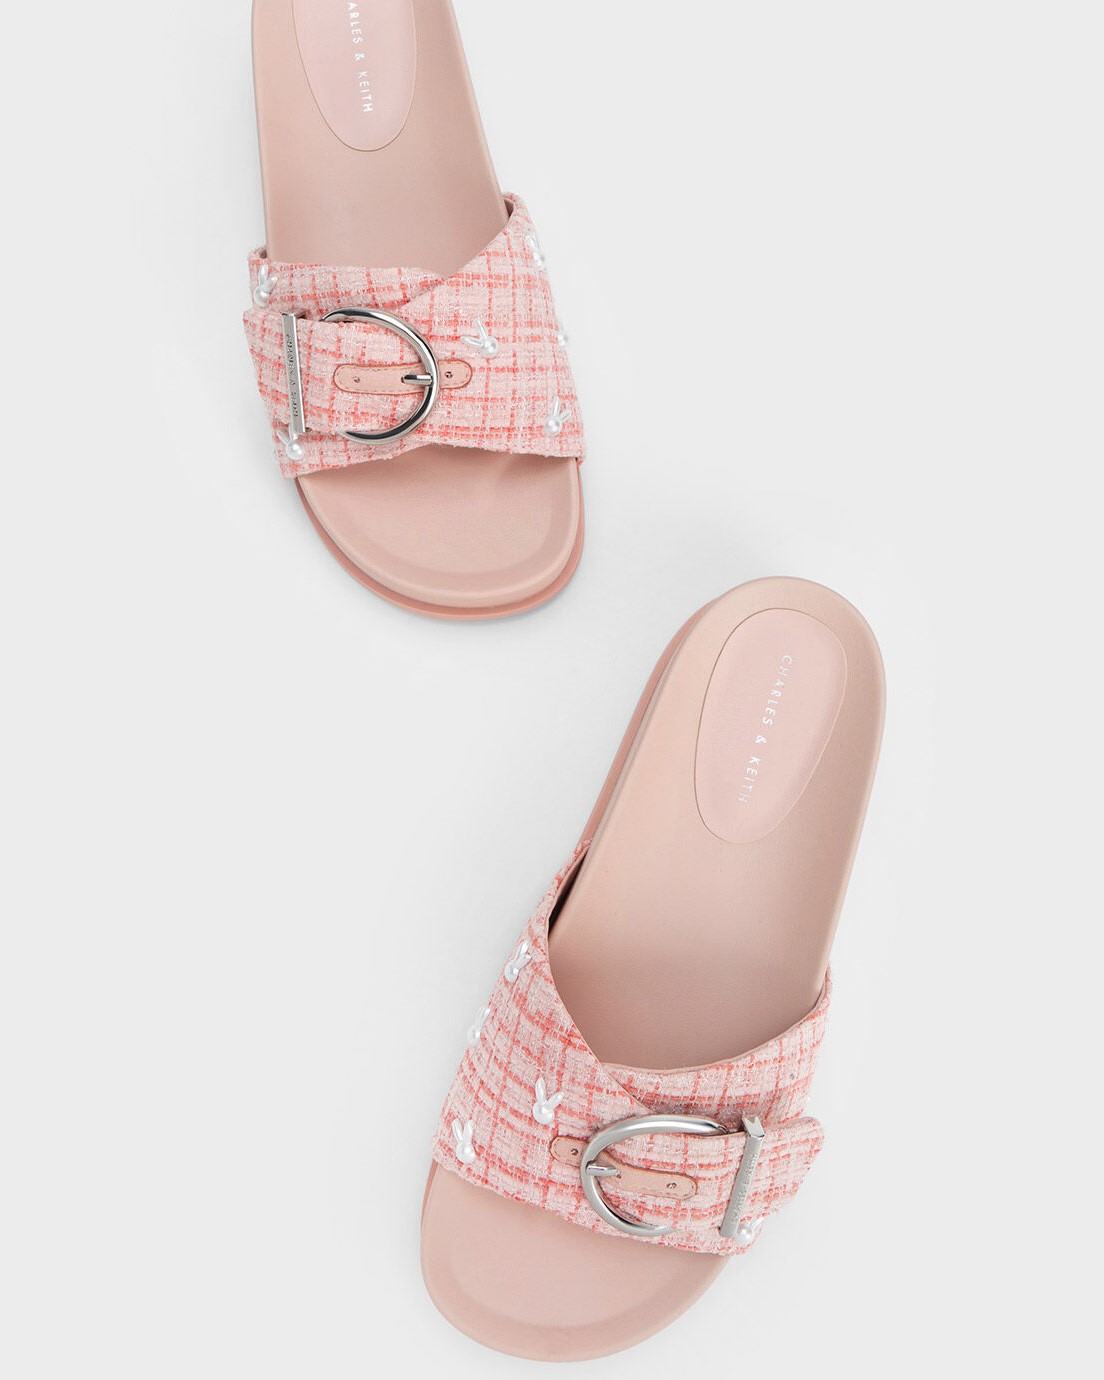 DÉP CHARLES KEITH CON THỎ BUNNY TWEED BUCKLED SLIDES CK1-70380933 6